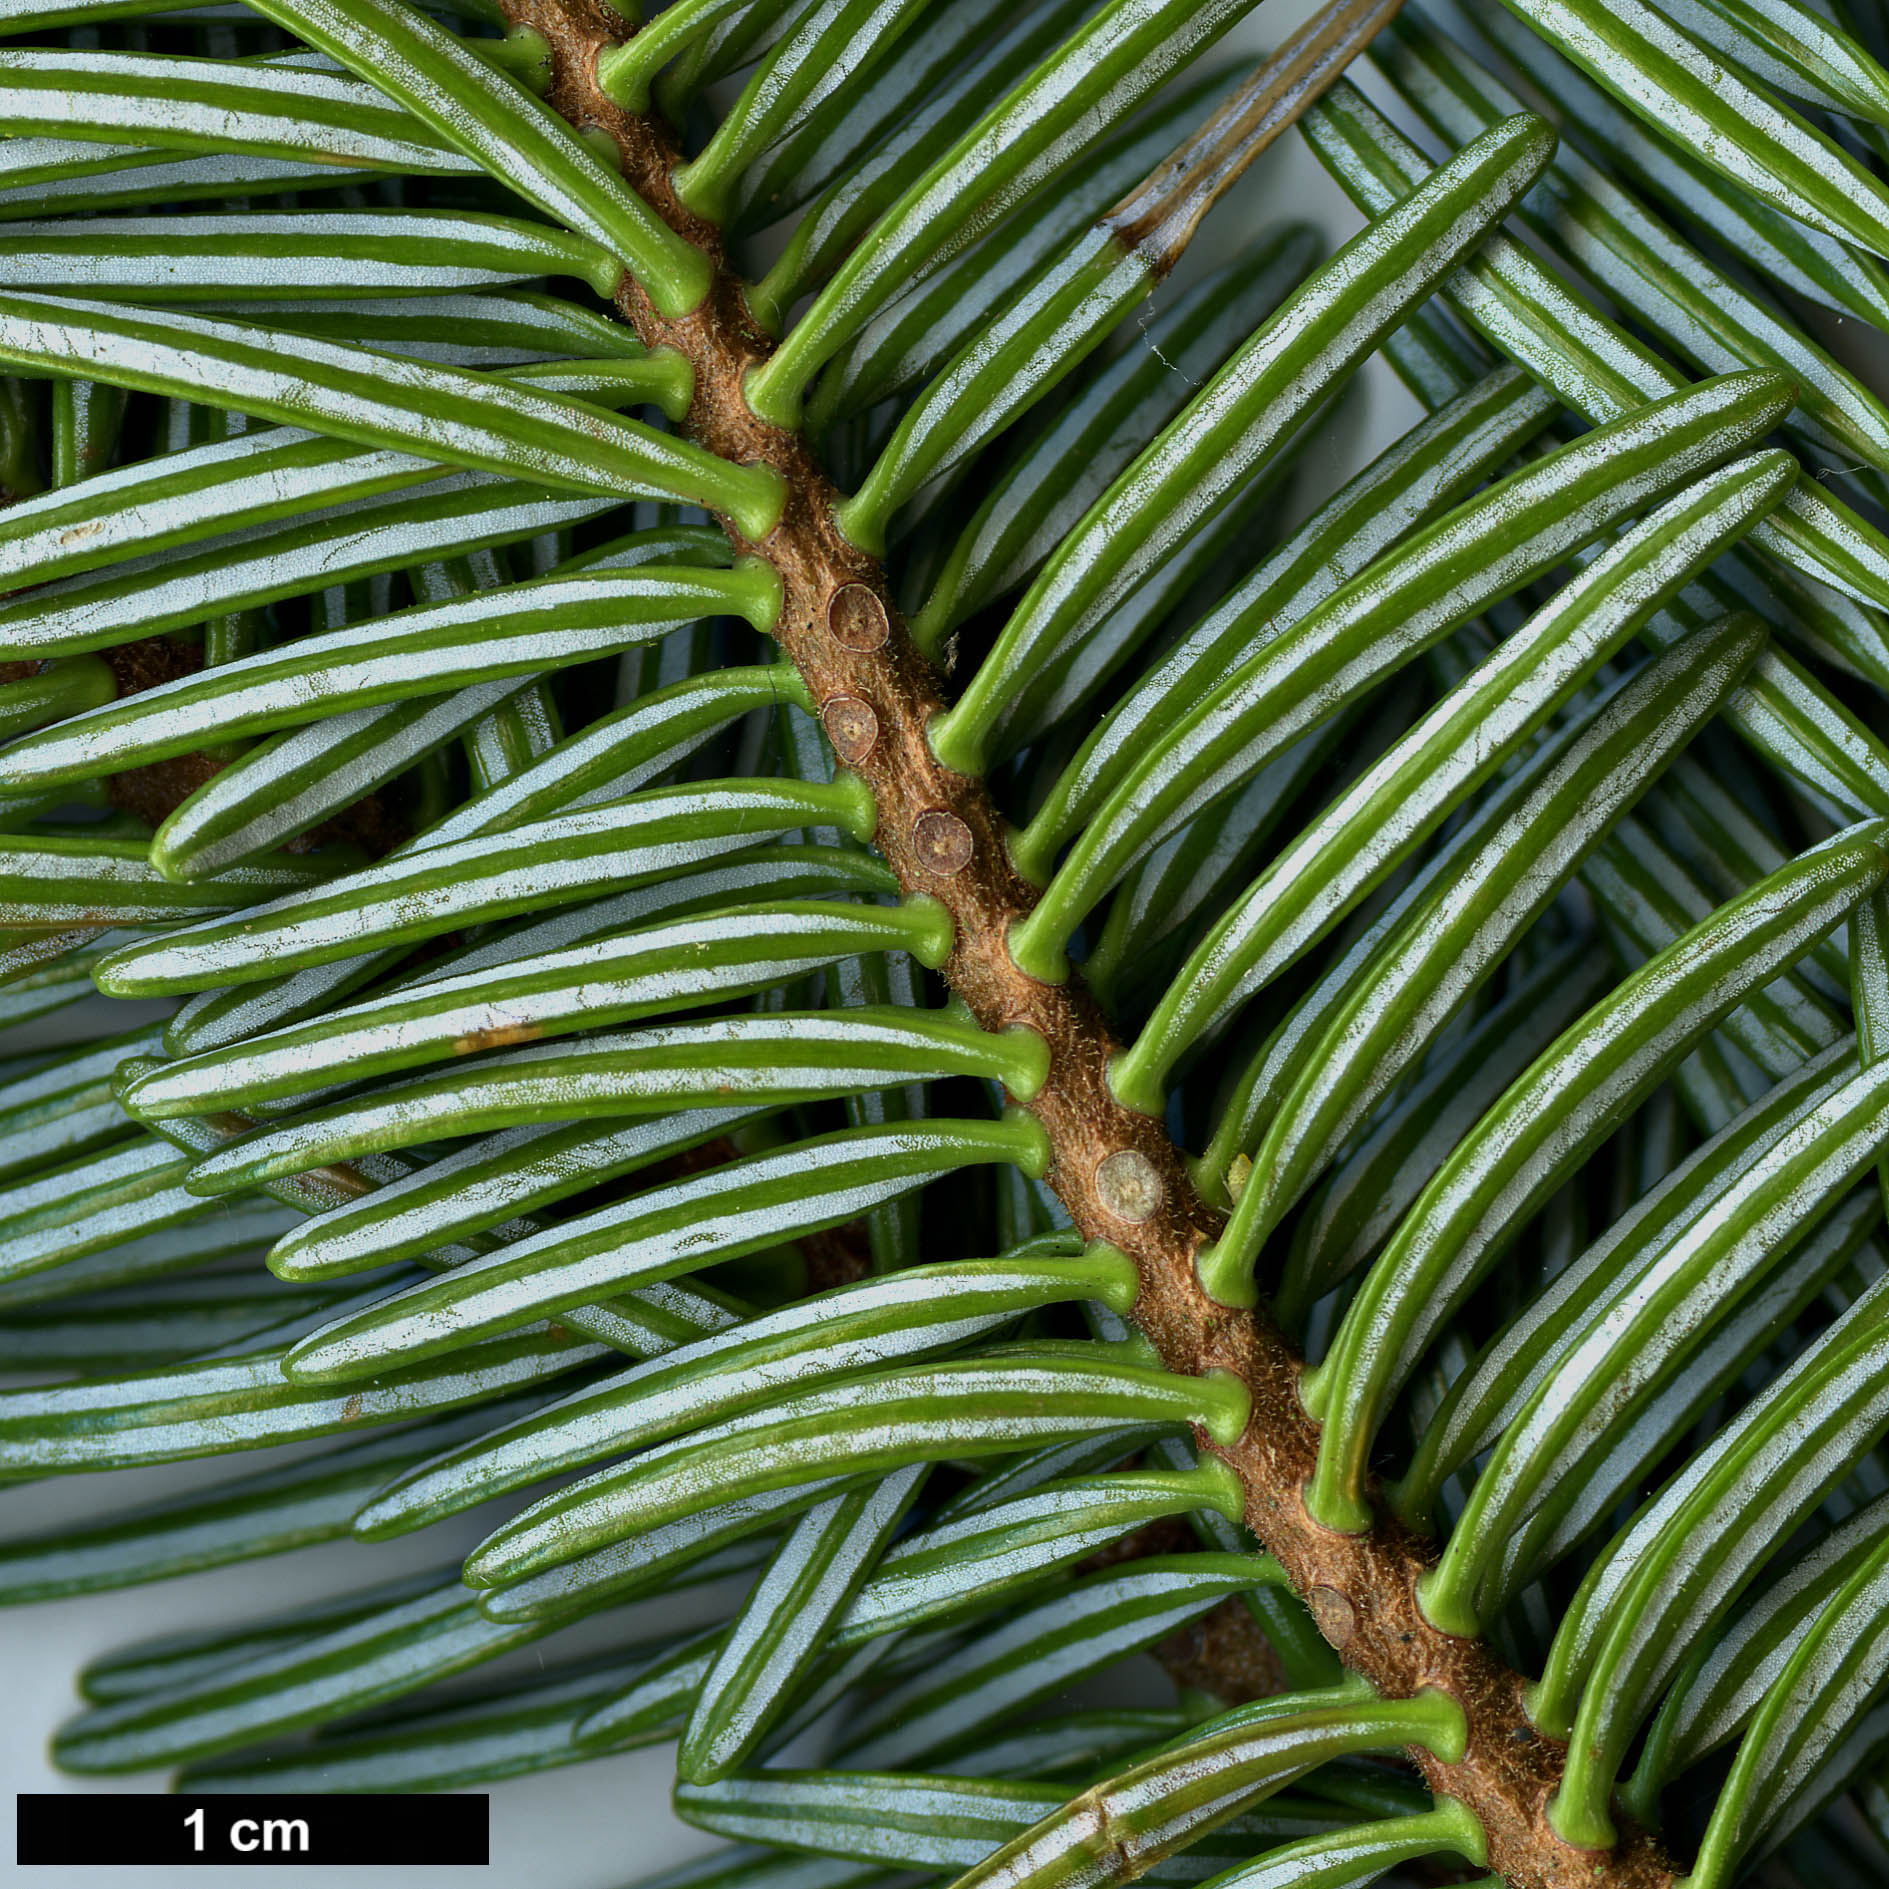 High resolution image: Family: Pinaceae - Genus: Abies - Taxon: ×insignis (A.nordmanniana × A.pinsapo)